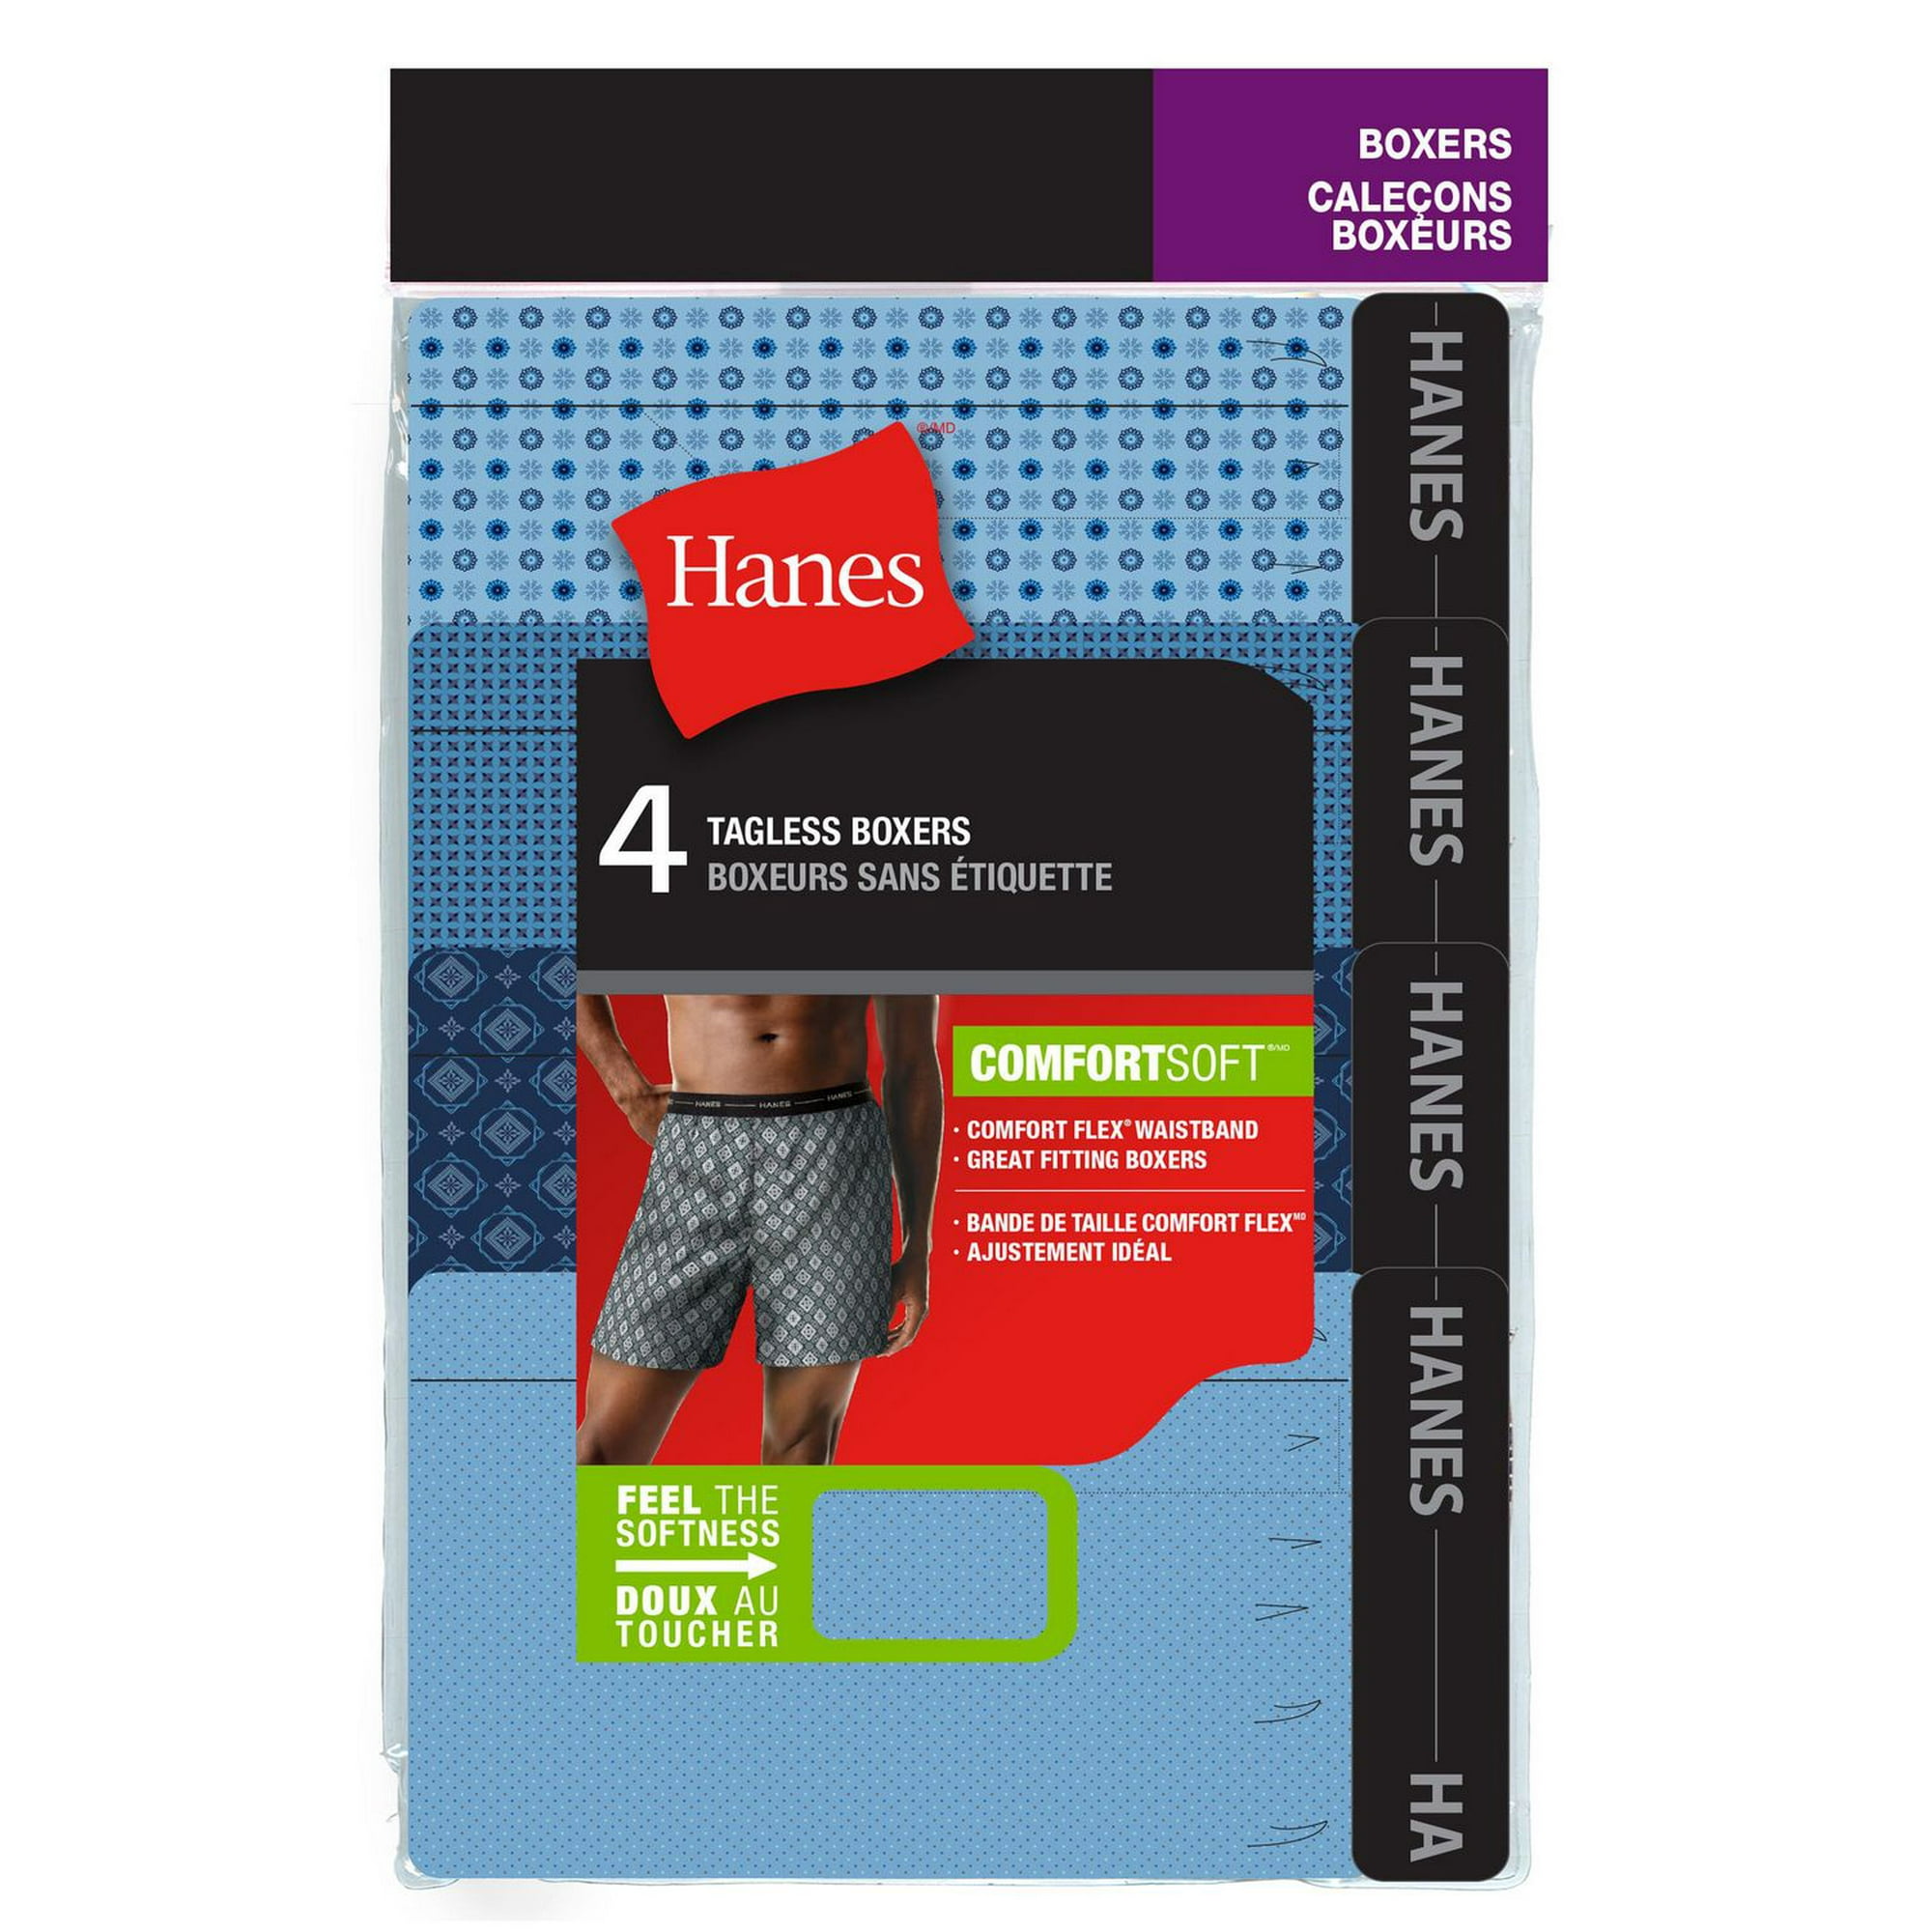 Hanes Men's Woven Tagless Boxers, Pack of 4, Sizes S-XL 